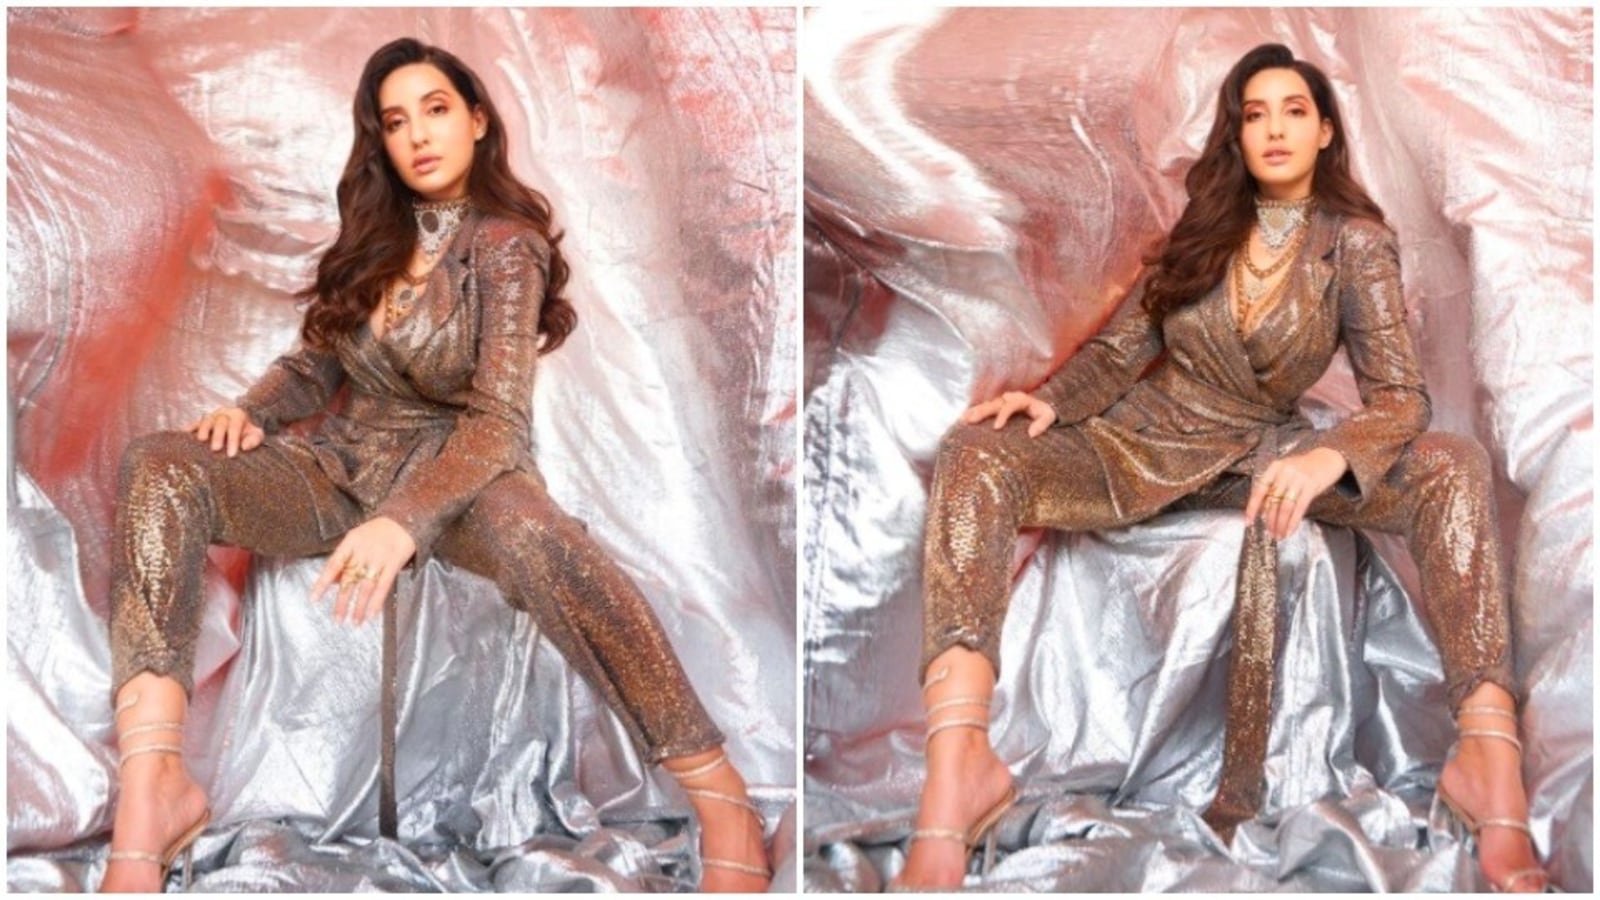 Nora Fatehi shows off her in queen in head-to-toe Gucci - Masala